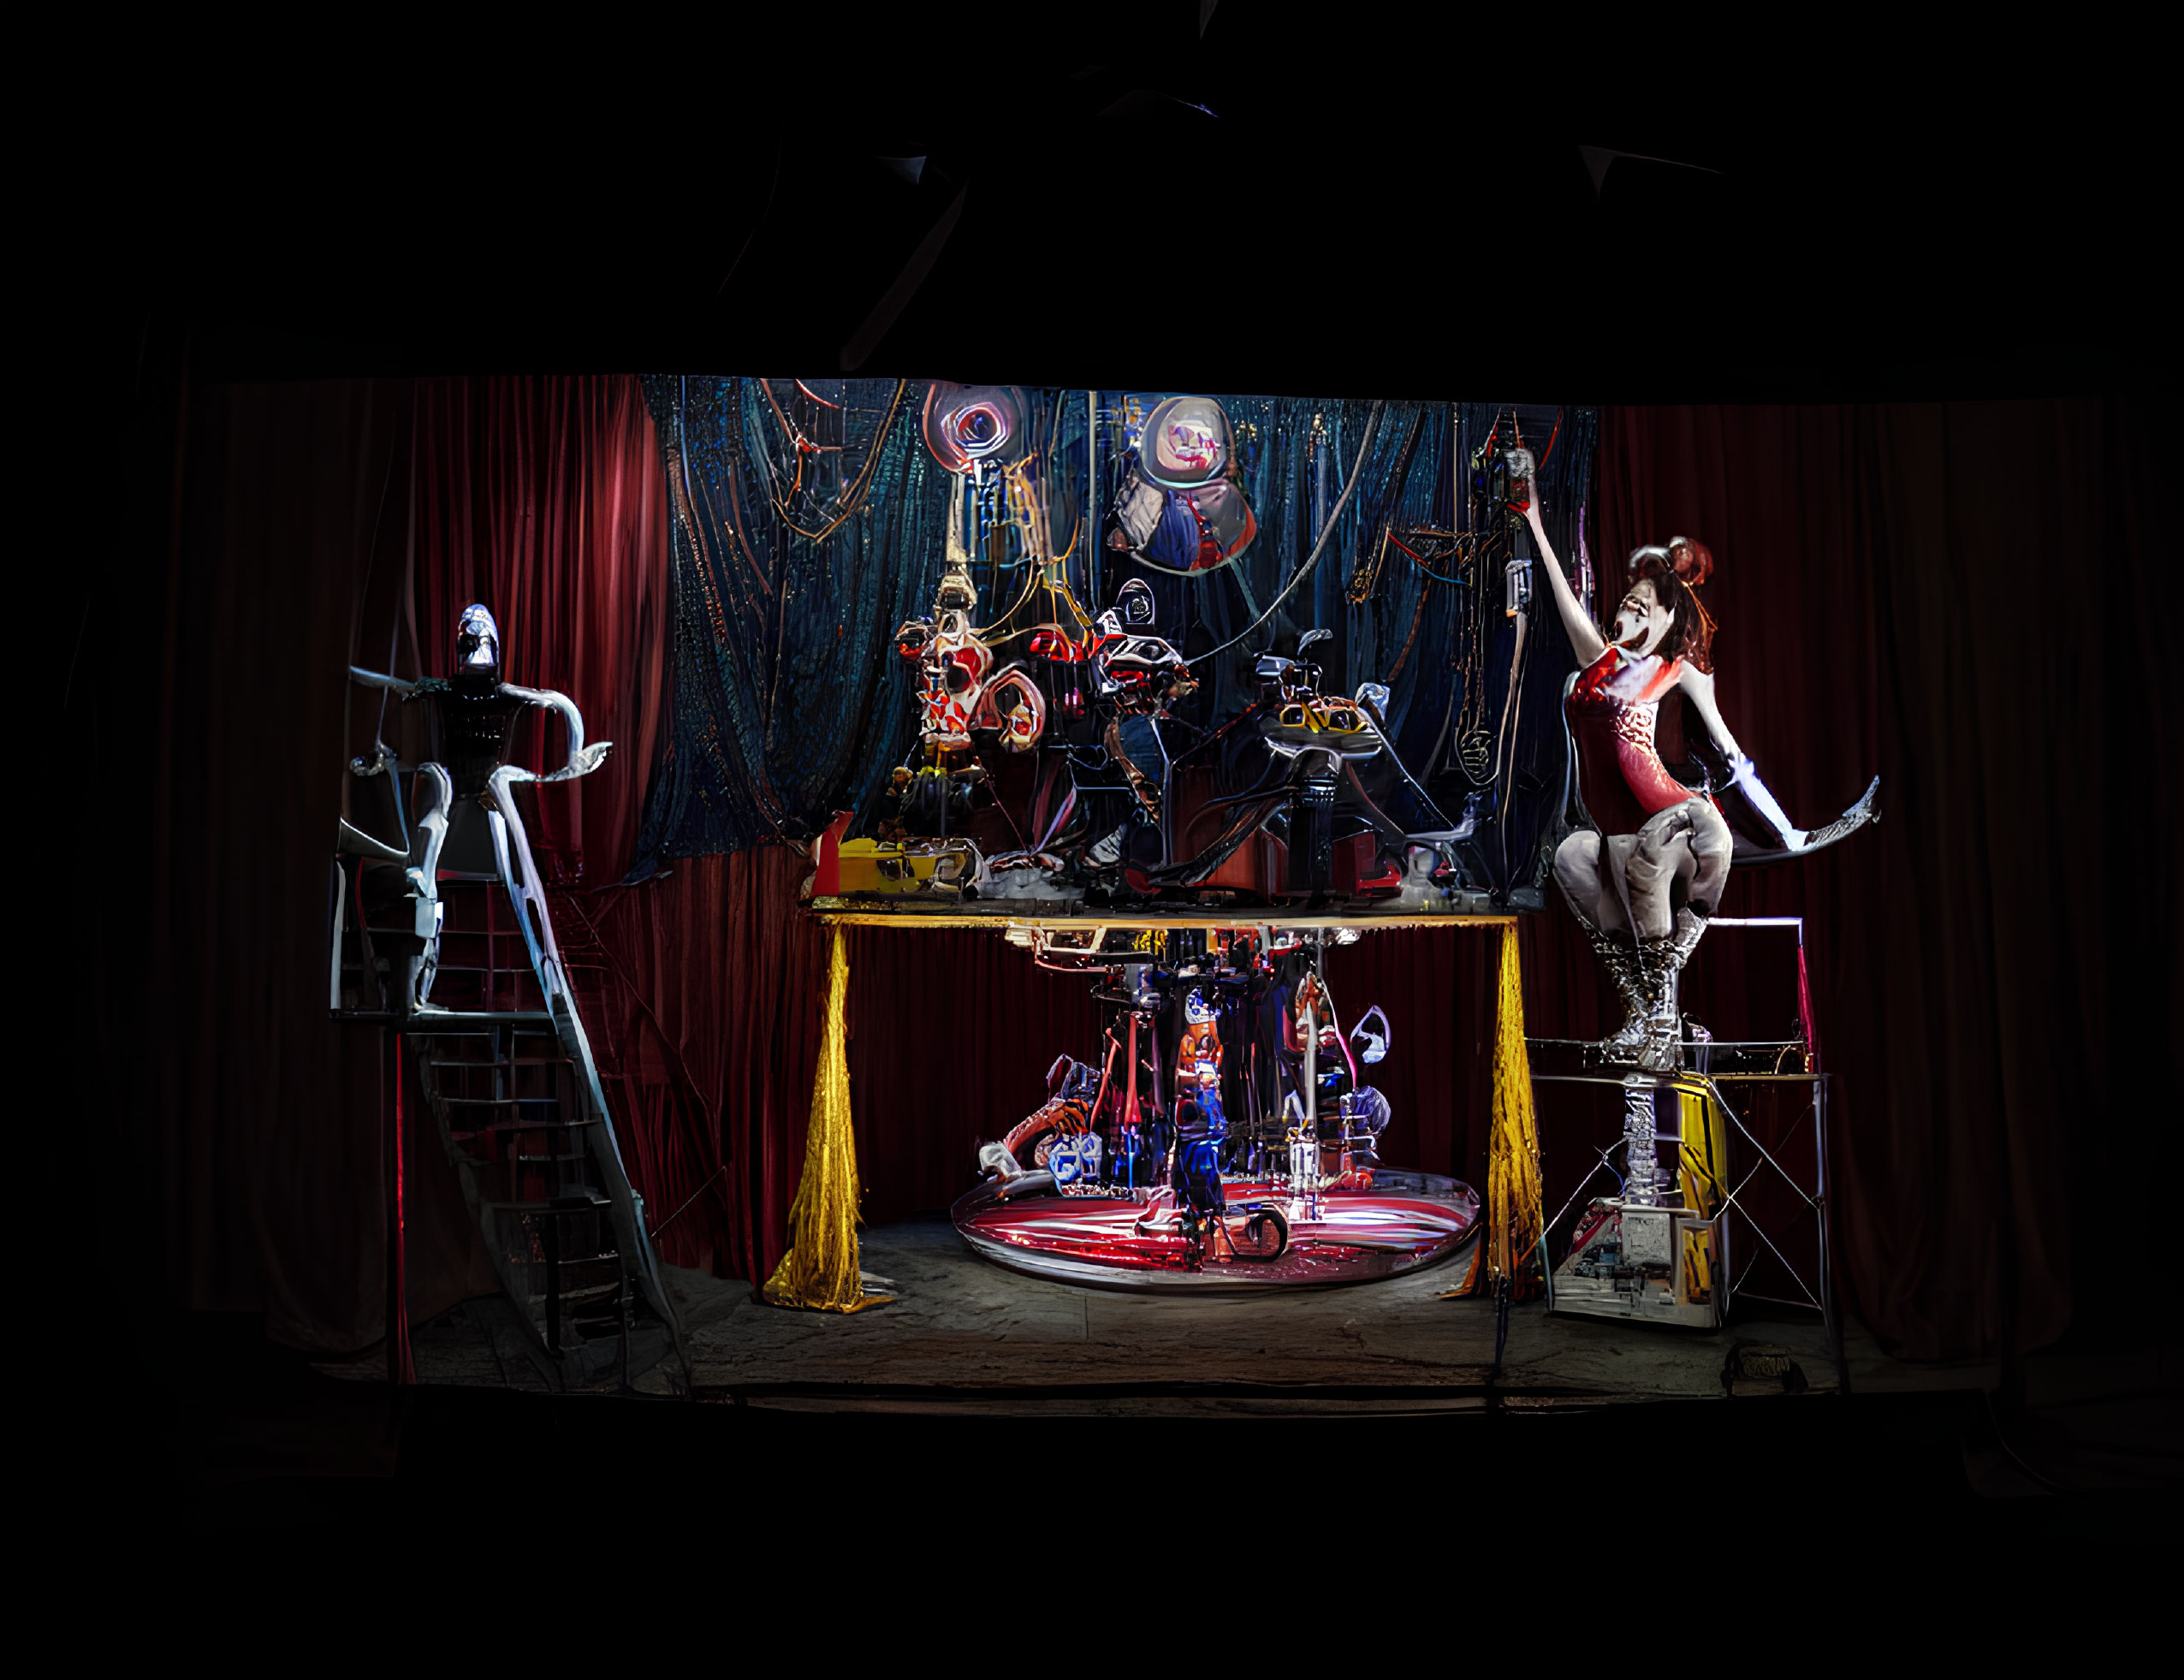 Whimsical stage with two people in artistic makeup and costumes interacting with a fantastical mechanical contraption